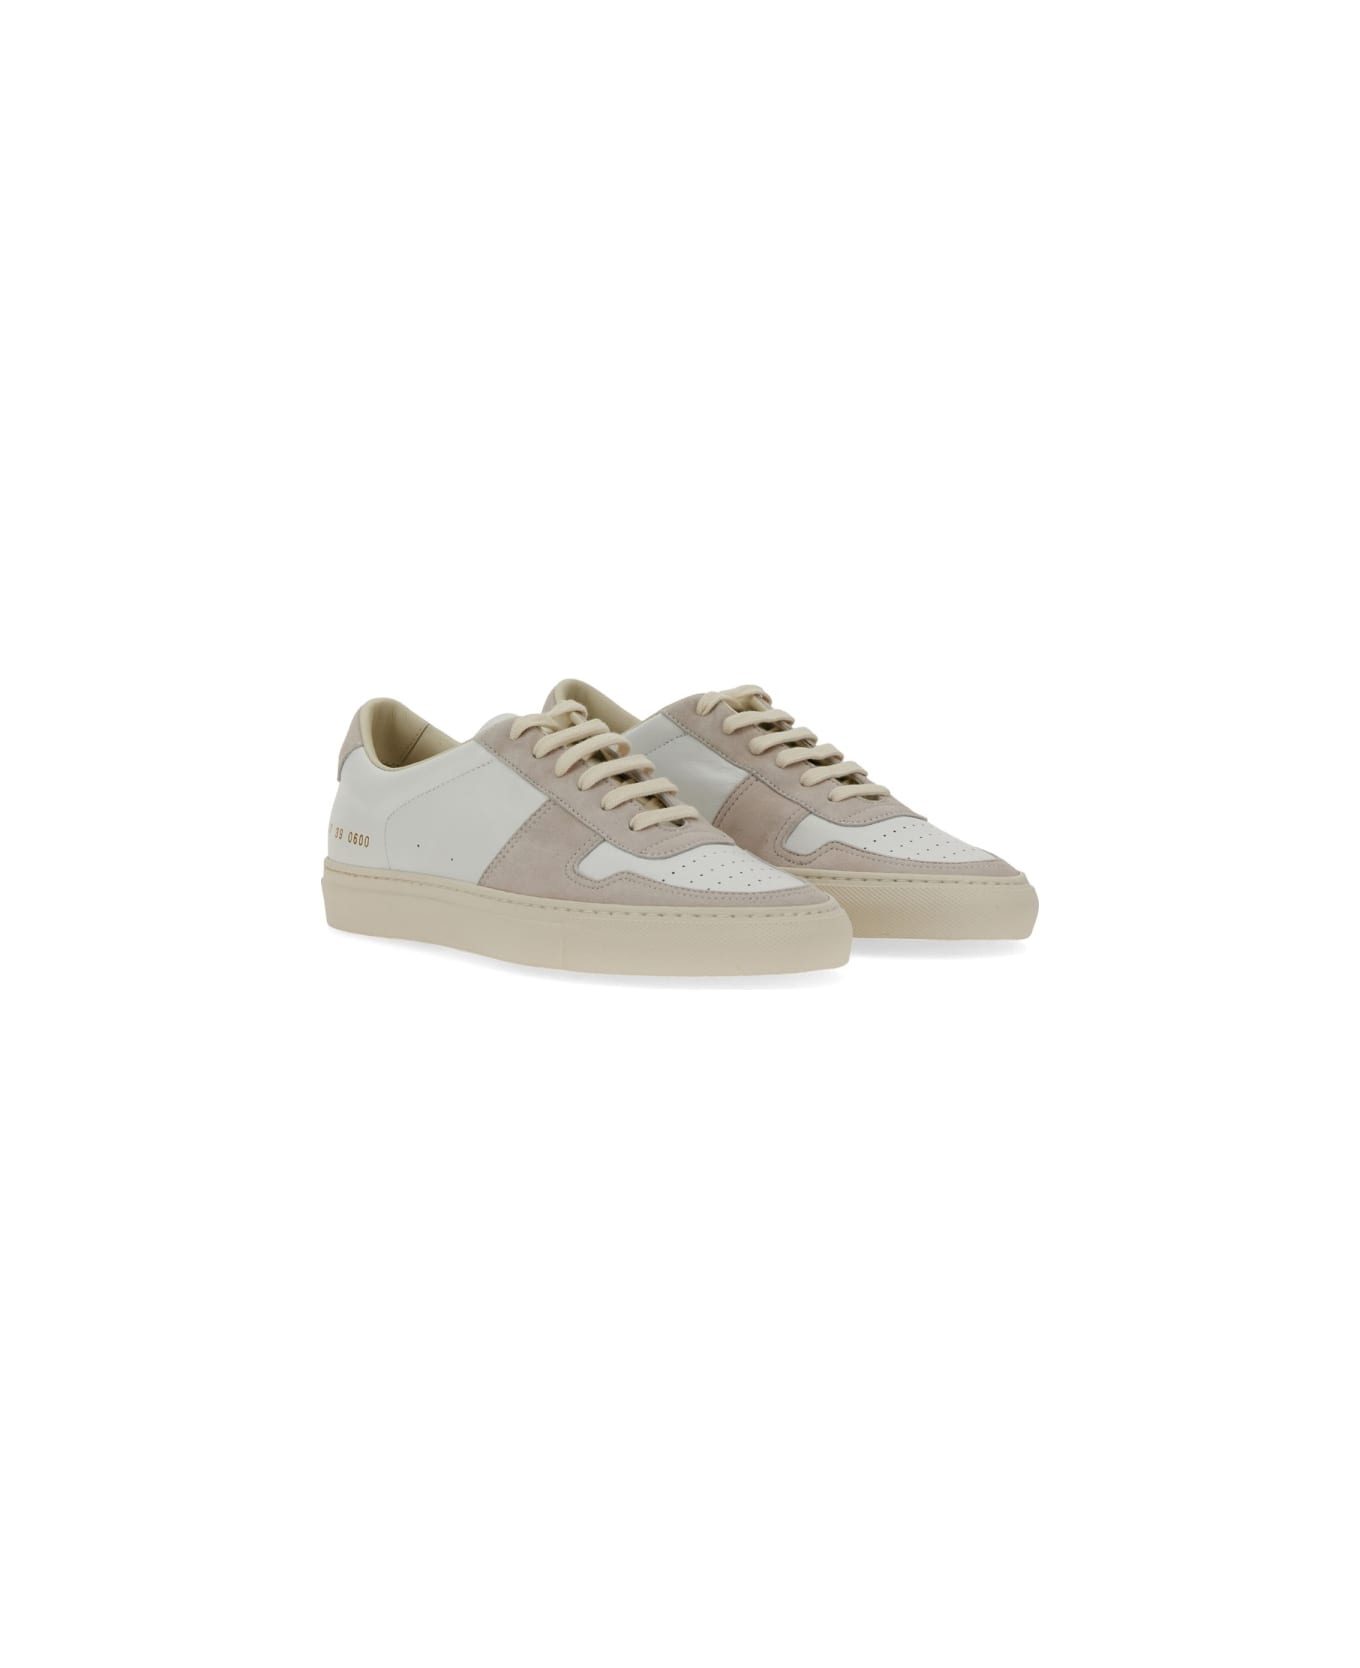 Common Projects "bball" Sneaker - NUDE